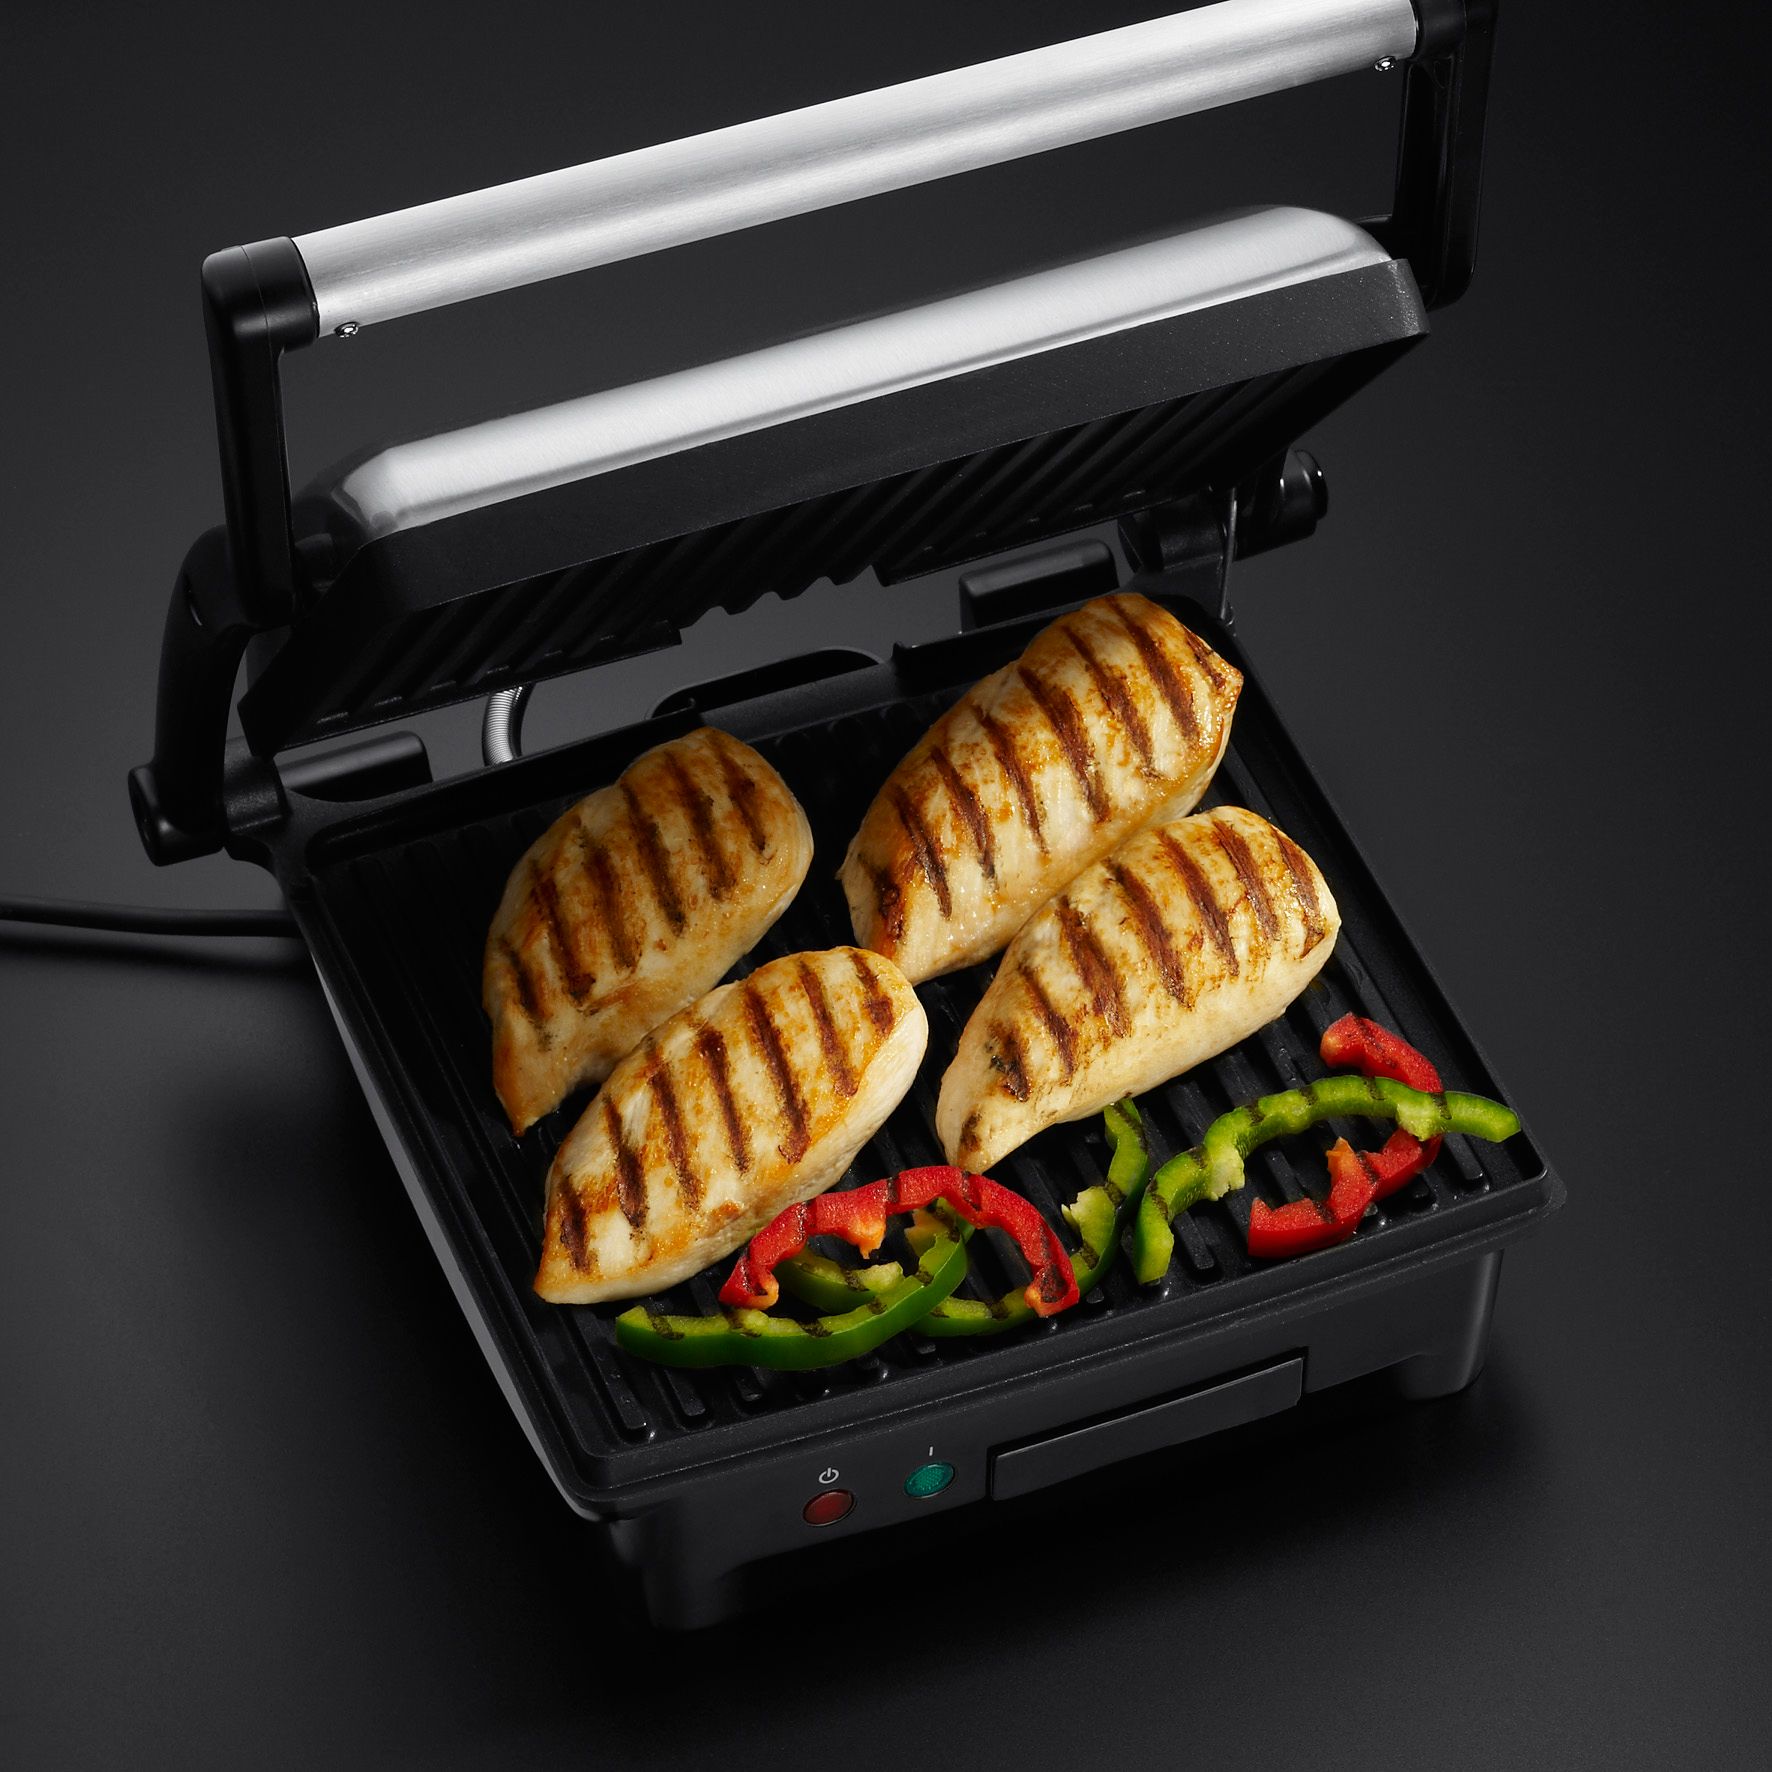 Hobbs Cook at Home 3-in-1 Panini Maker, and Griddle